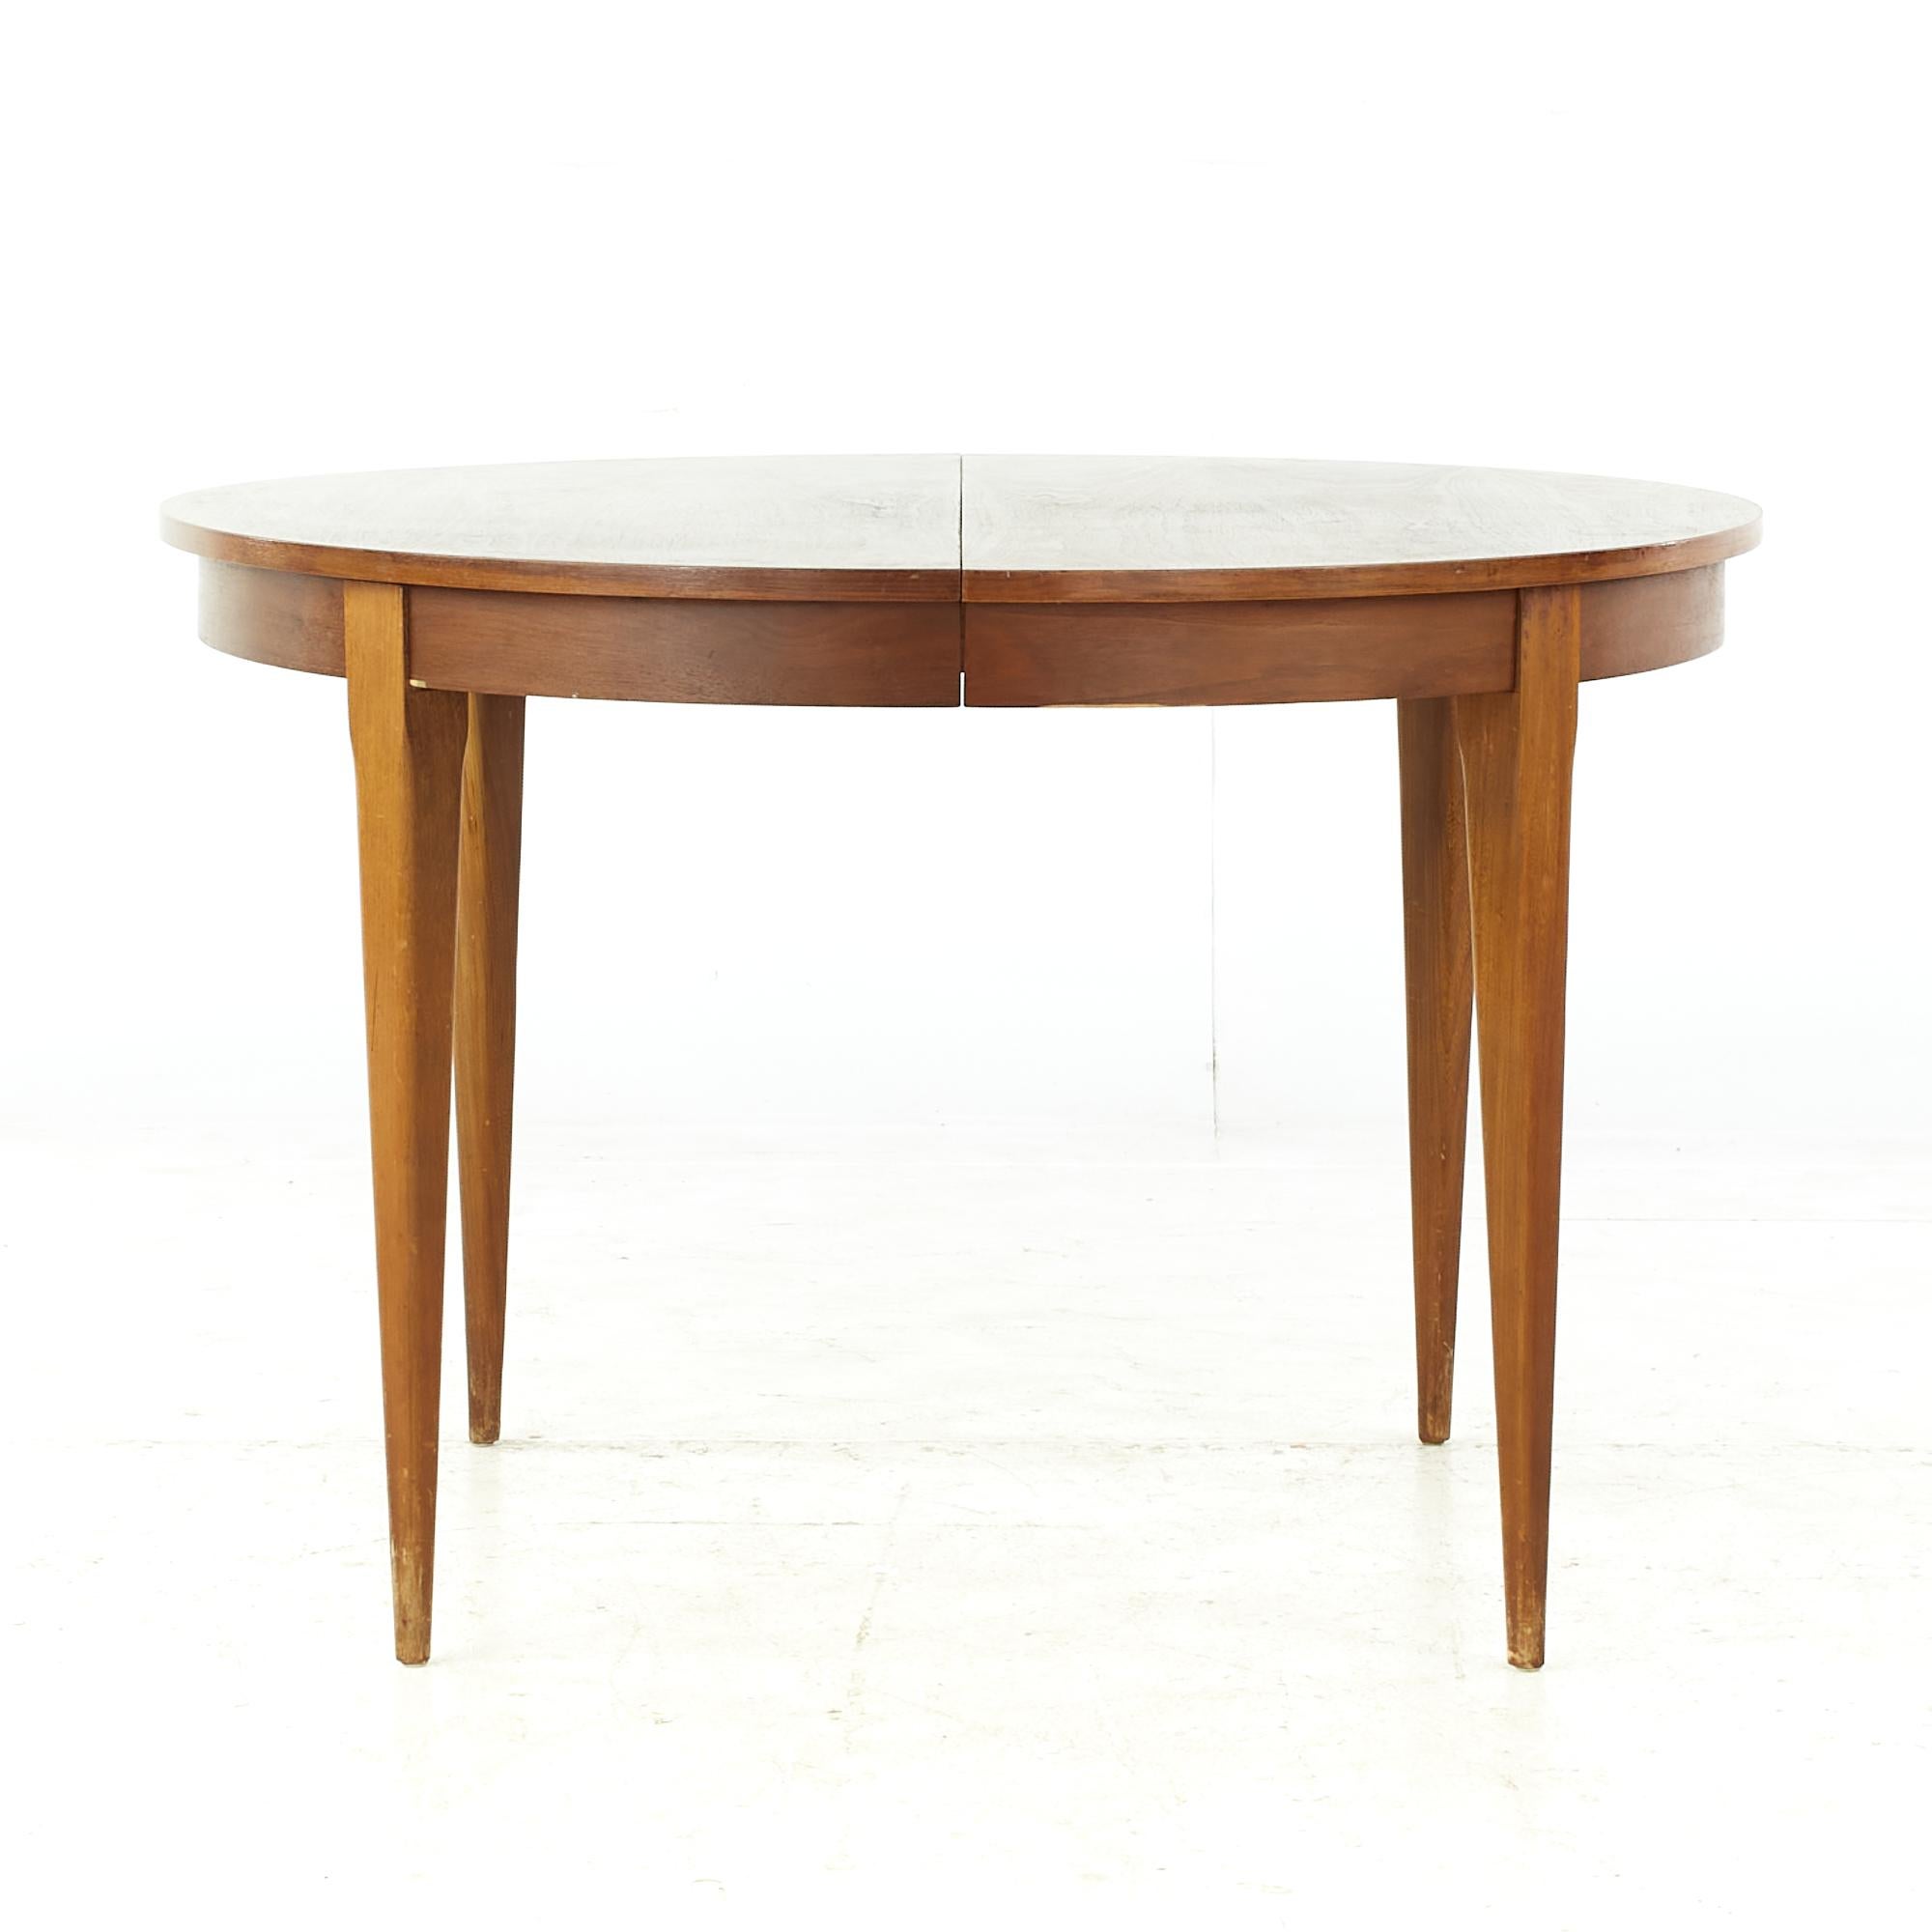 Young Manufacturing midcentury walnut dining table with 2 leaves

This table measures: 44.25 wide x 44 deep x 29.25 high, with a chair clearance of 25.5 inches, each leaf measures 18 inches wide, making a maximum table width of 80.25 inches when